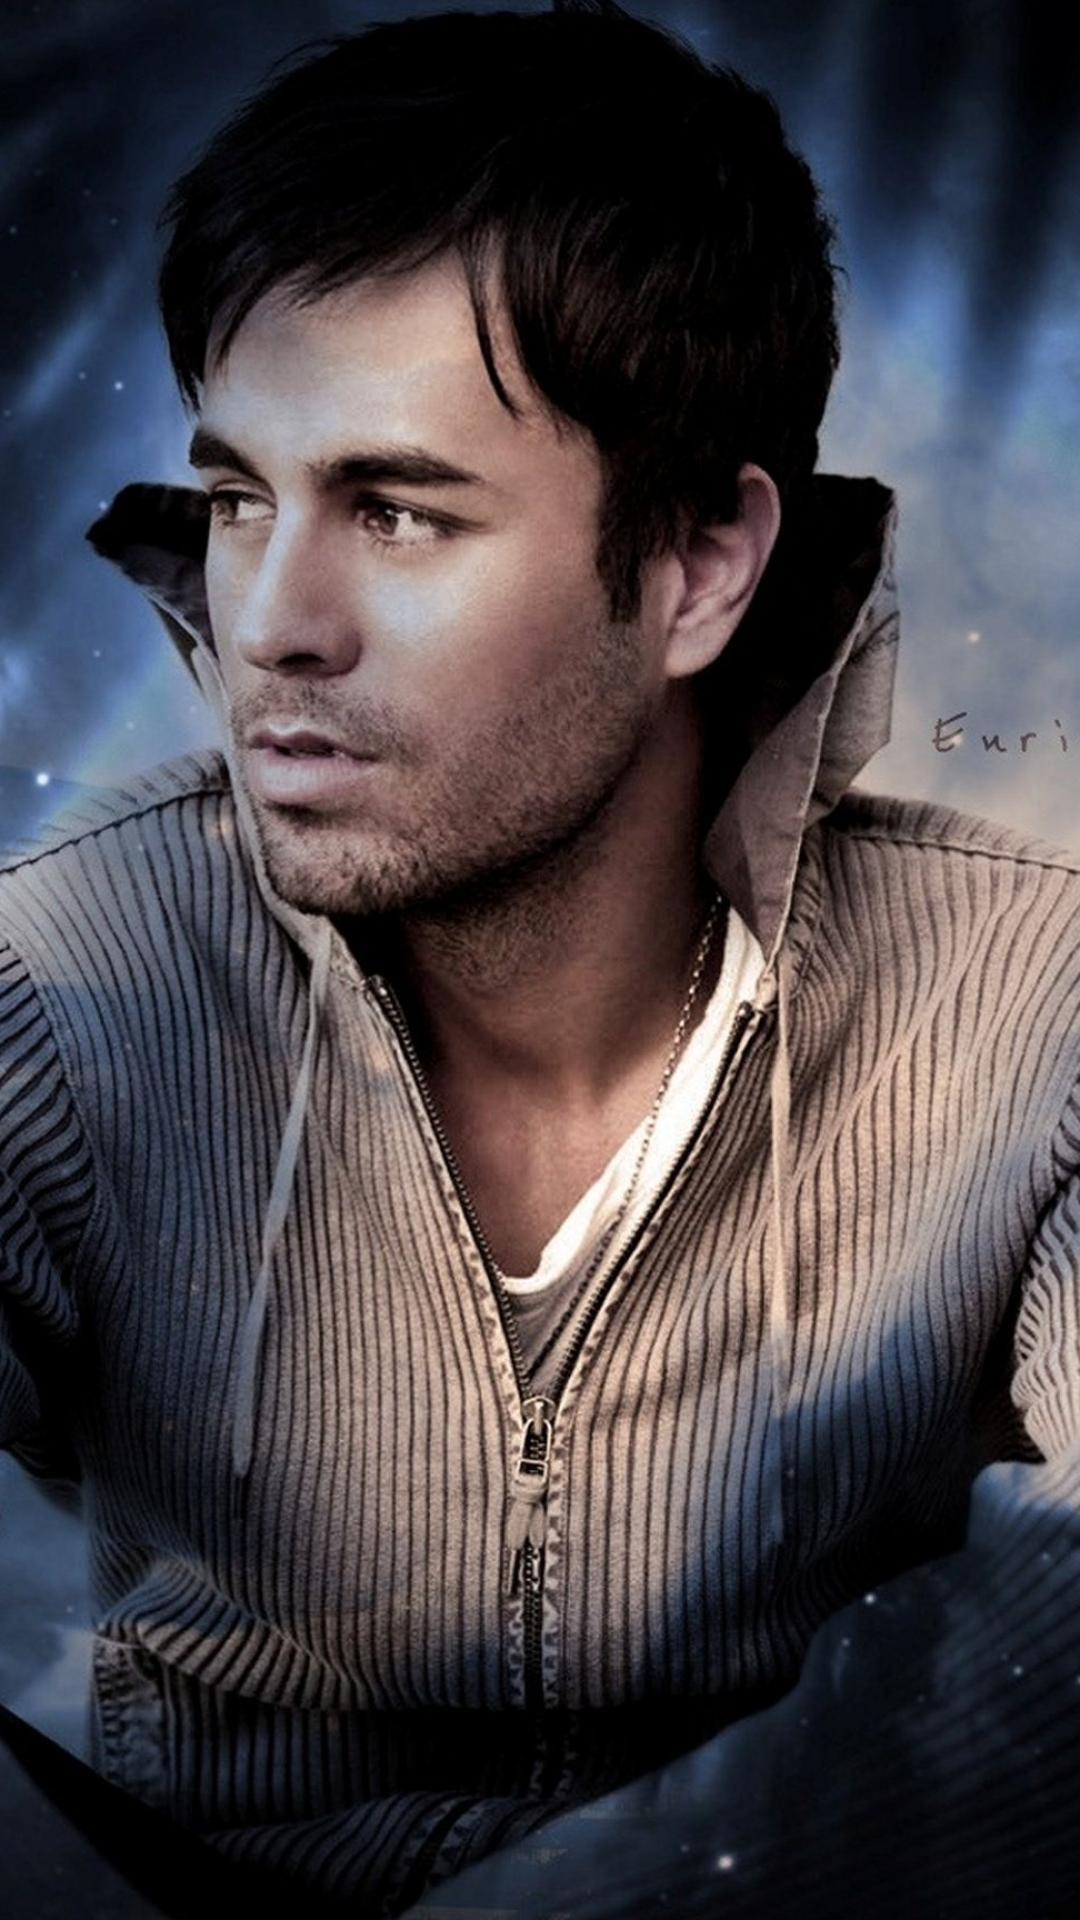 Enrique Iglesias and Anna Kournikova: The singles “Escape” and “Don't Turn Off the Lights” are his biggest commercial success to date. 1080x1920 Full HD Background.